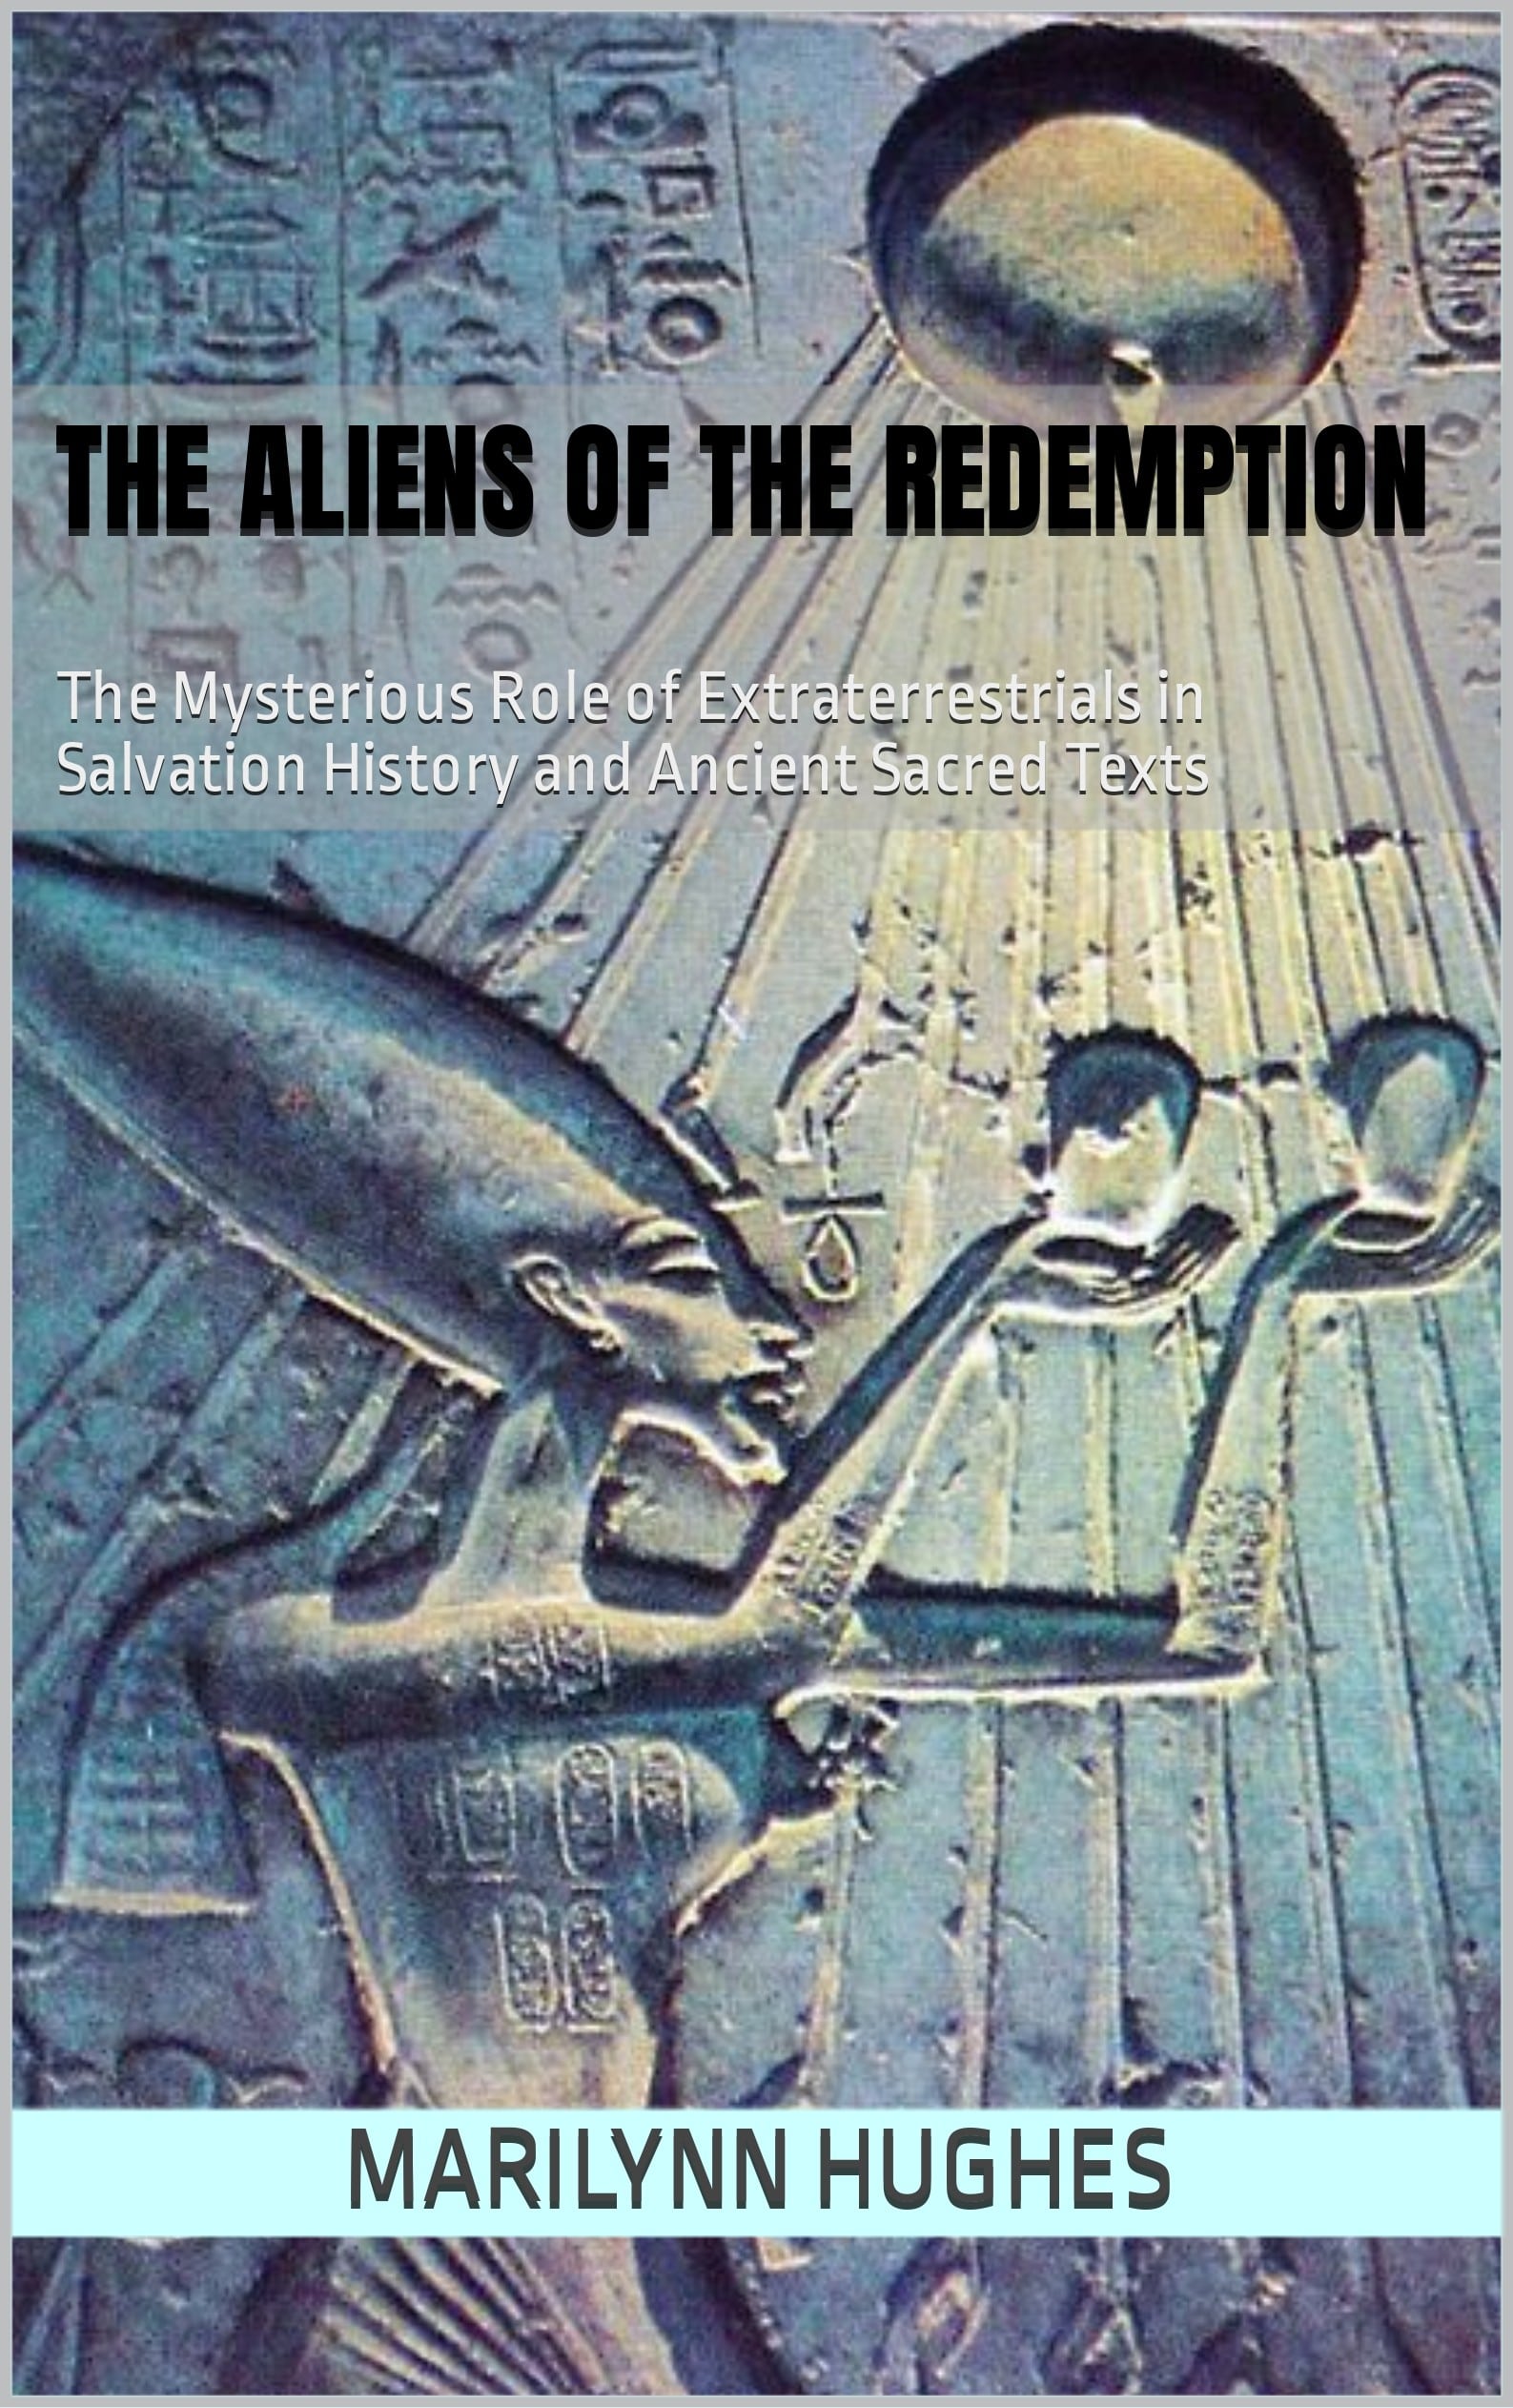 The Mysterious Role of Extraterrestrials in Salvation History and Ancient Sacred Texts - What does out-of-body travel show us? - An Out-of-Body Travel Book